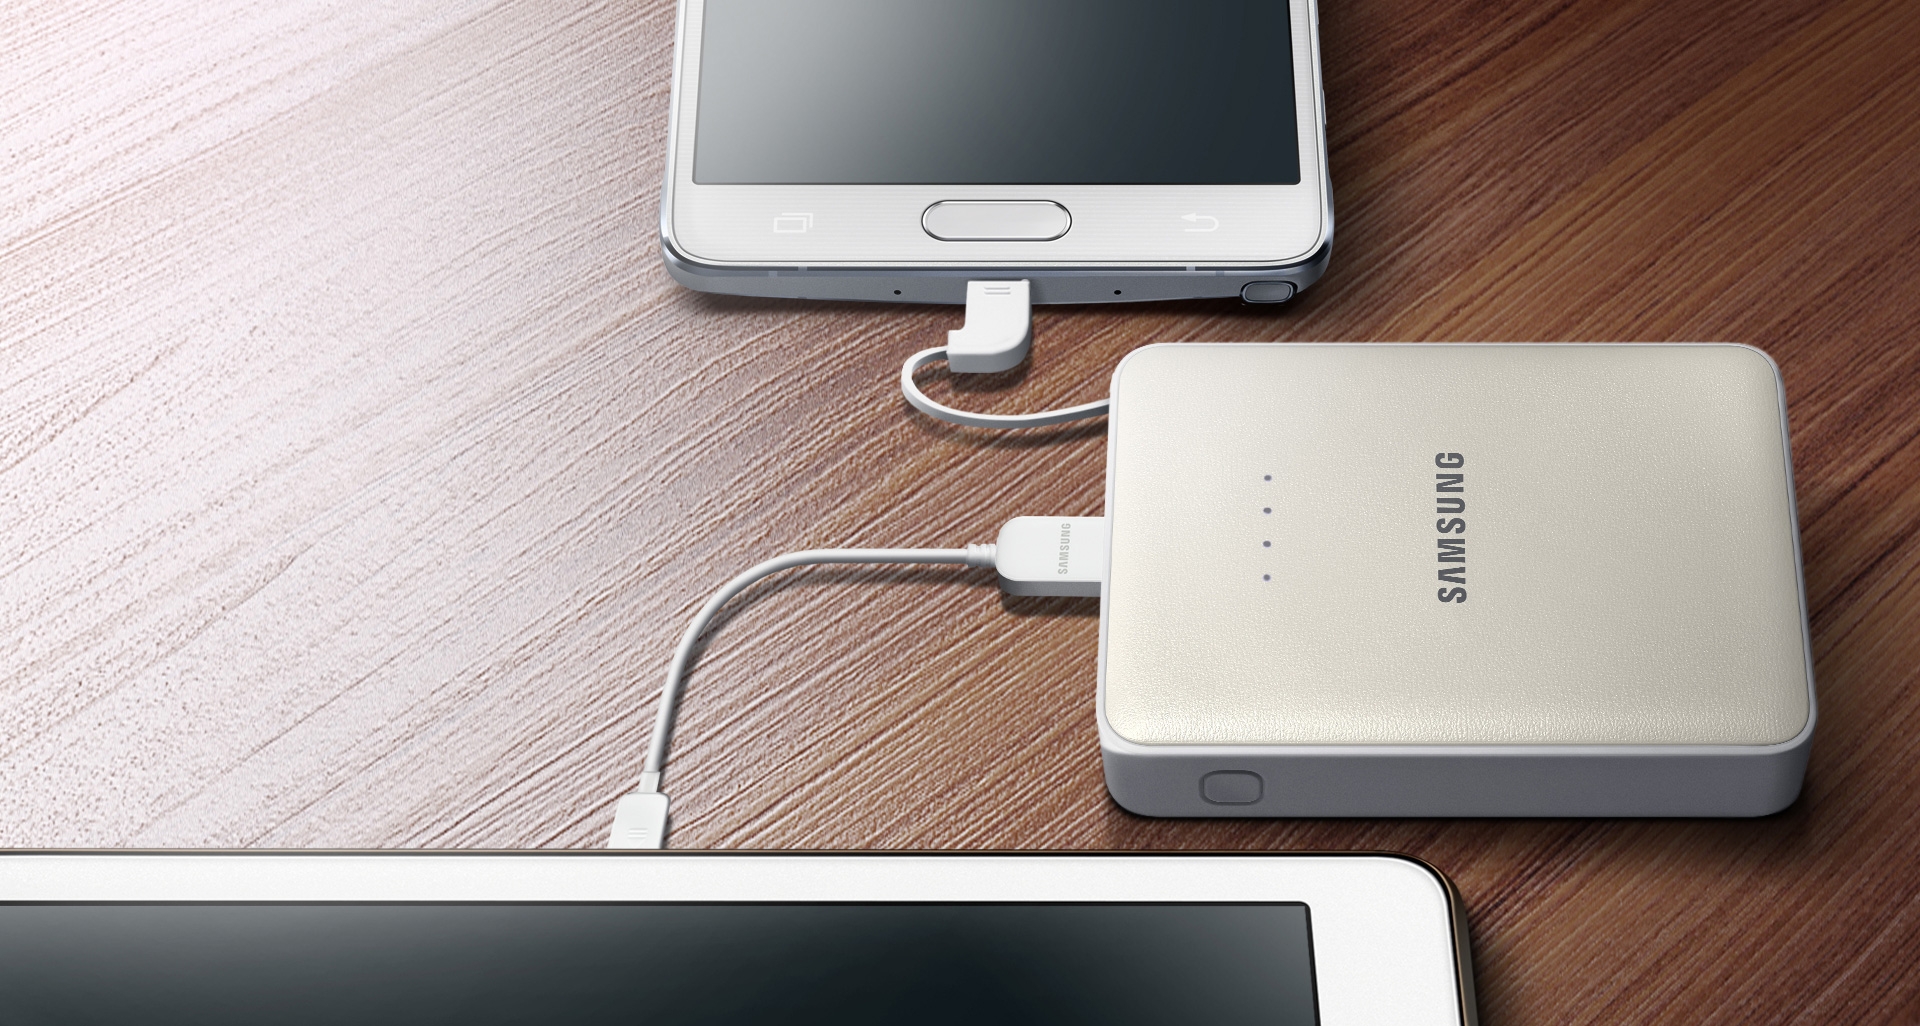 Easy to use - charging multiple devices simultaneously